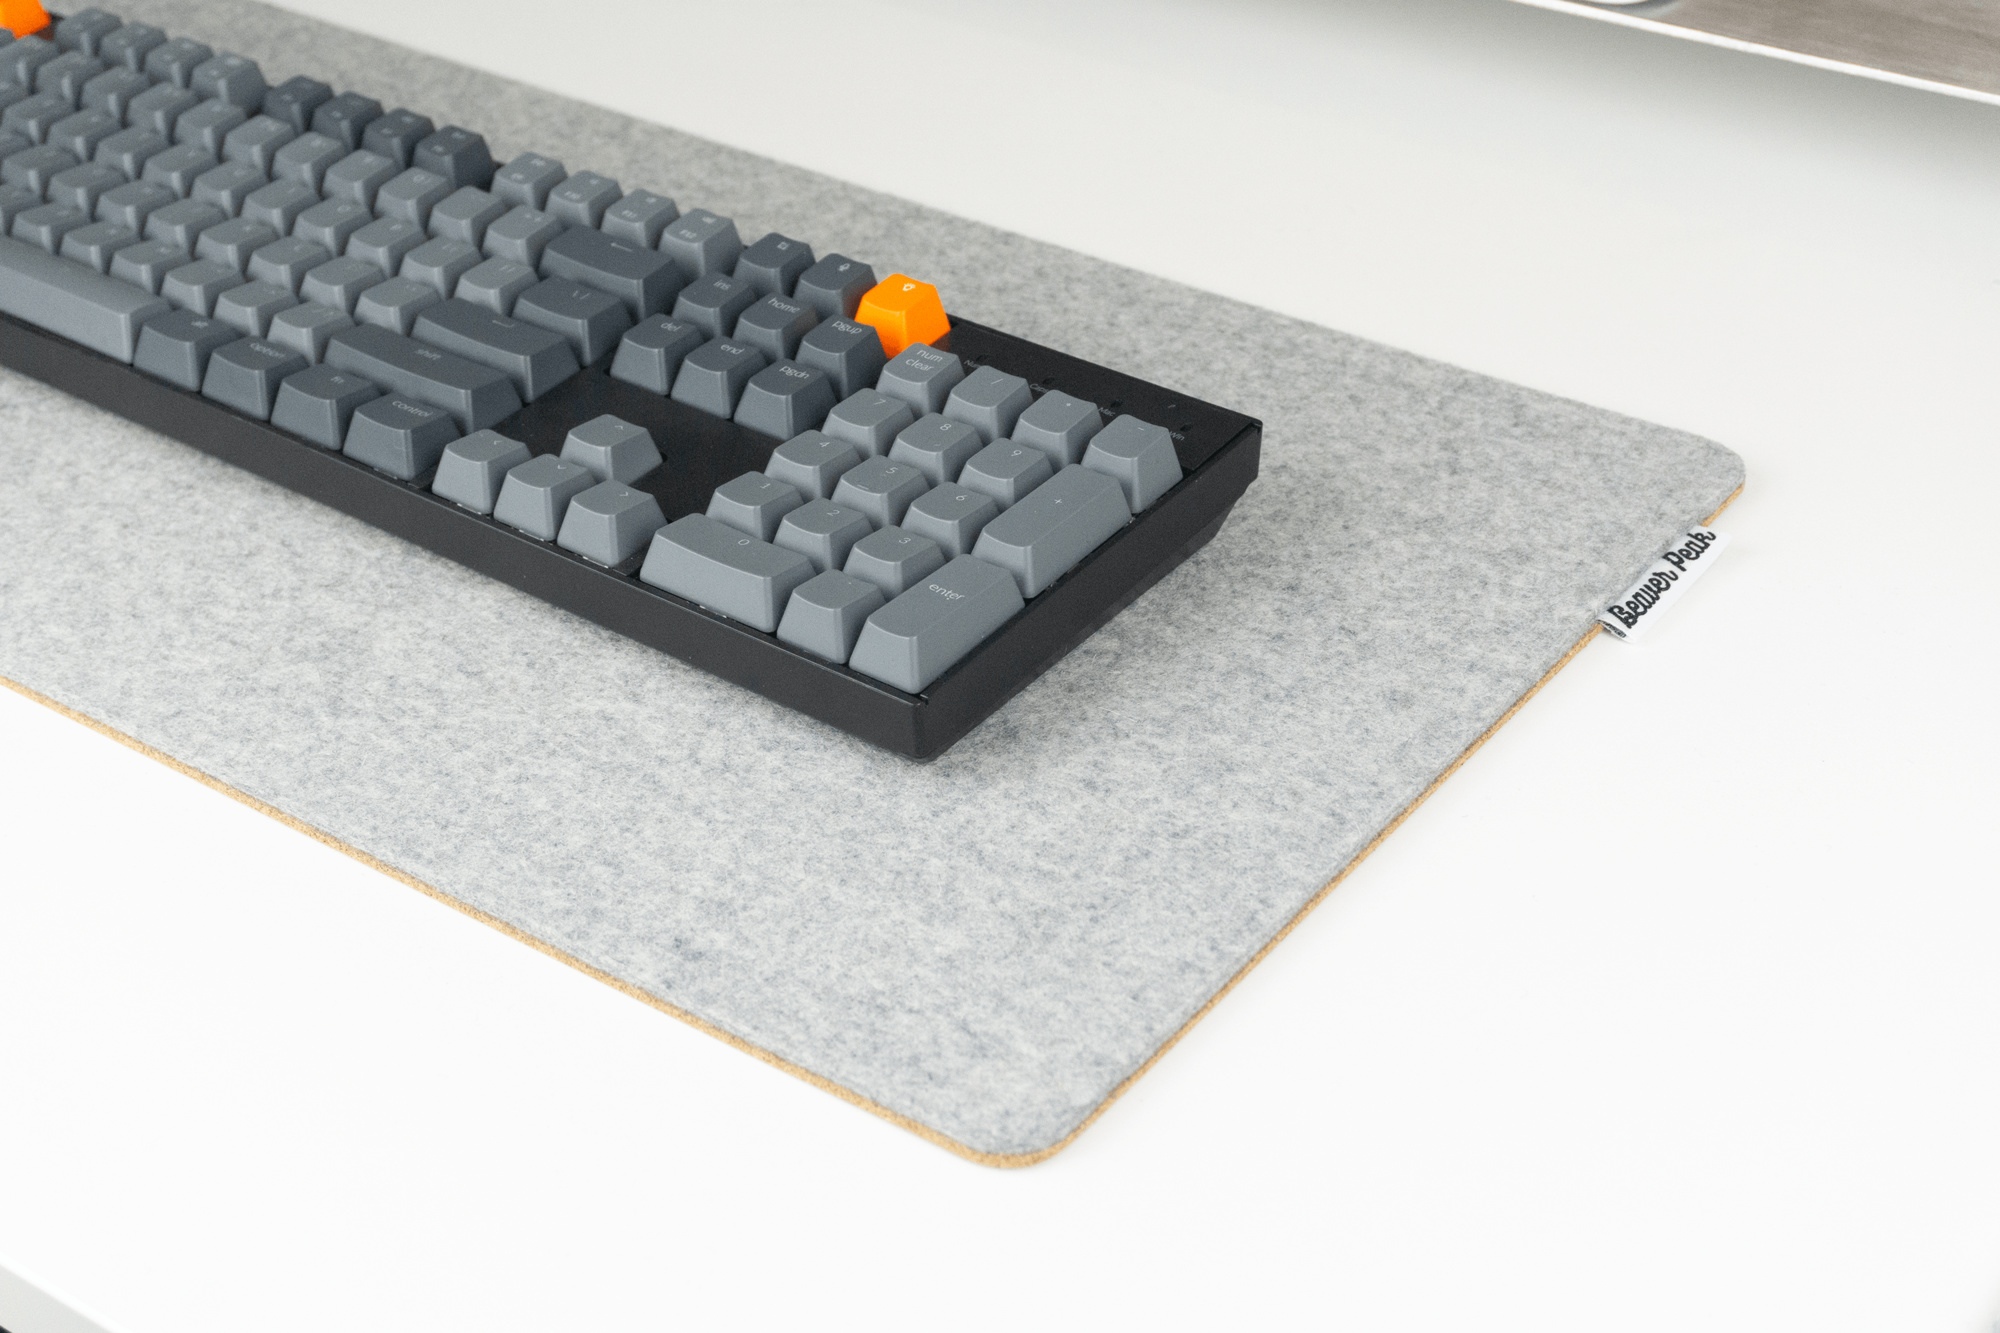 Grey merino wool felt and cork desk pad with BeaverPeak logo tag on the right side and a Keychron mechanical keyboard on top.